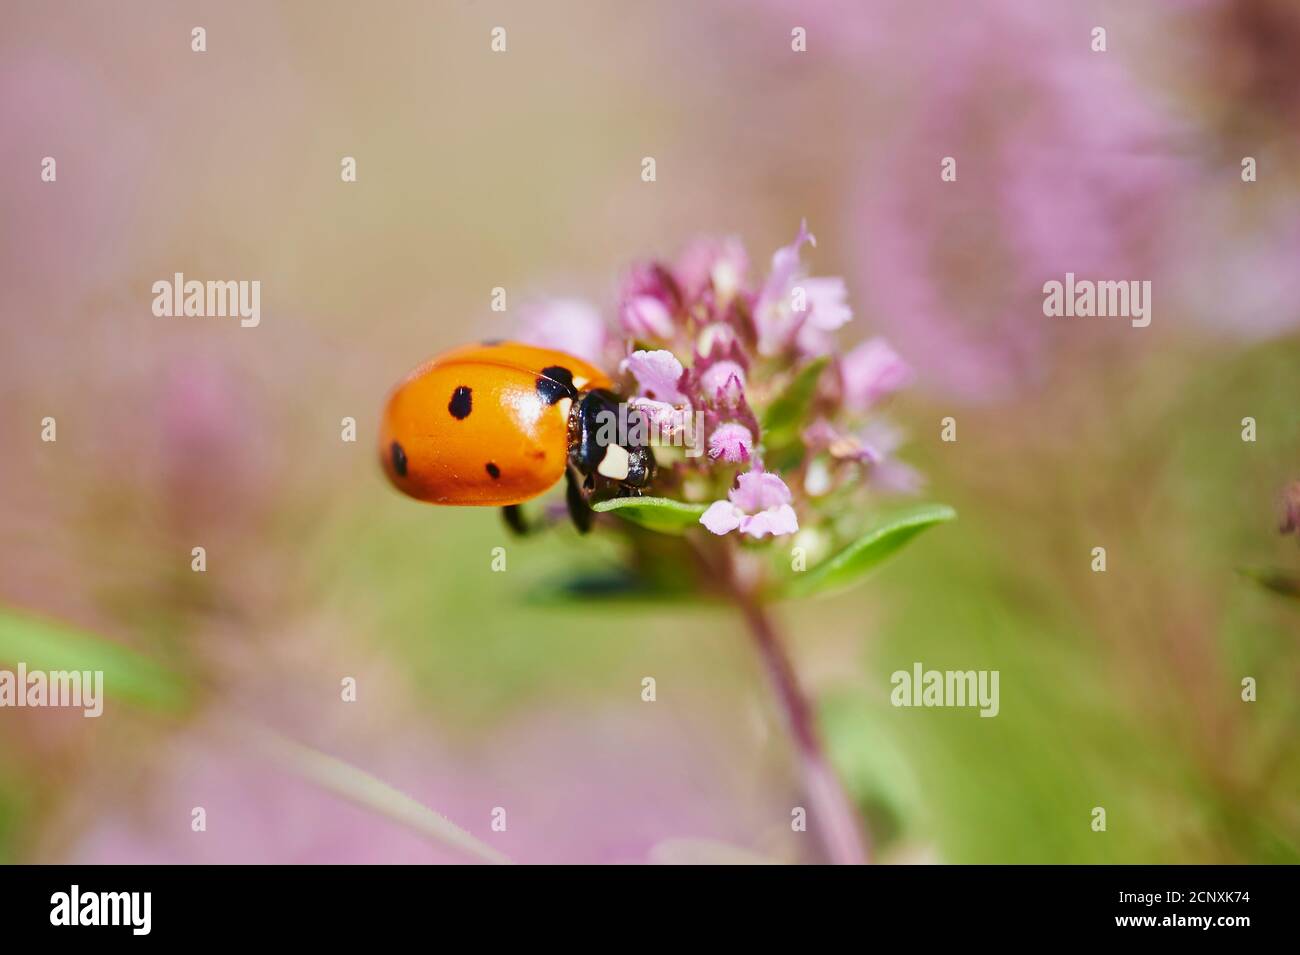 Ant seven-spotted ladybird (Coccinella magnifica), real thyme (Thymus vulgaris), blossom, sideways, sitting Stock Photo